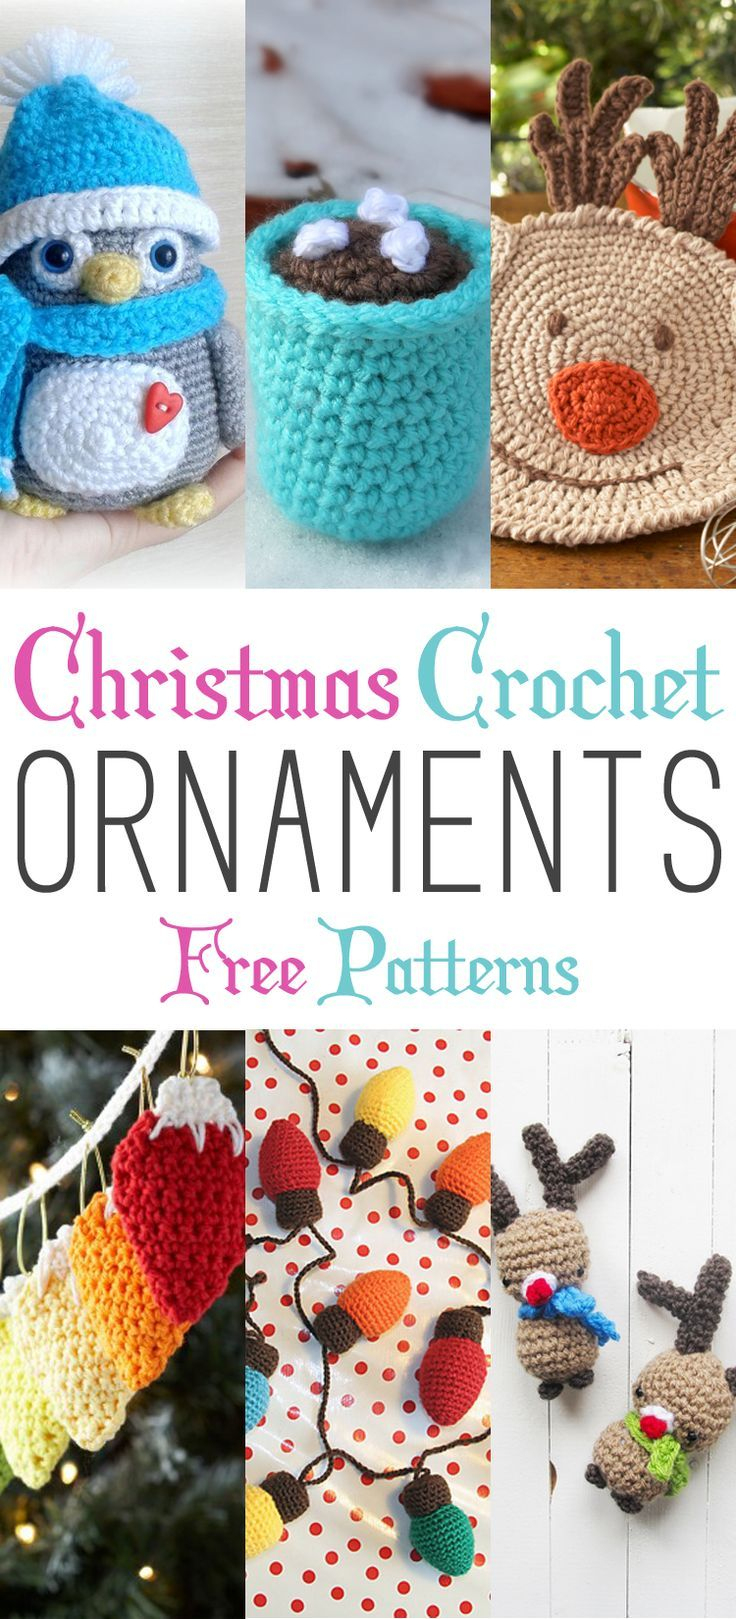 Christmas Crochet Ornaments With Free Patterns - Free Printable Christmas Crochet Patterns